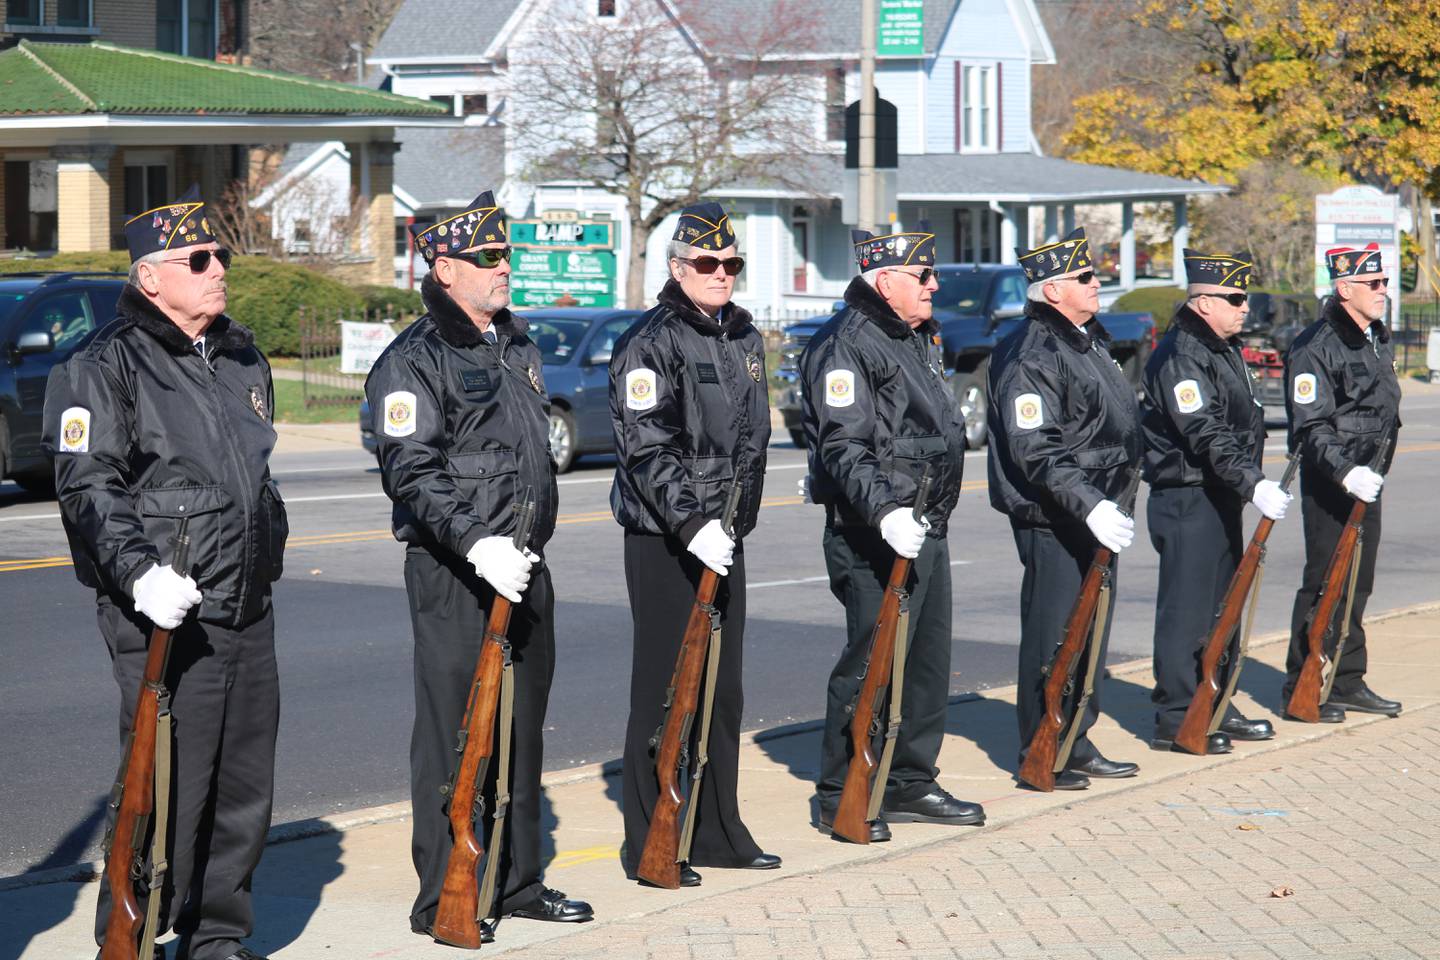 The Honors Guard is seen Nov. 11, 2022 in downtown DeKalb at a Veterans Day ceremony.